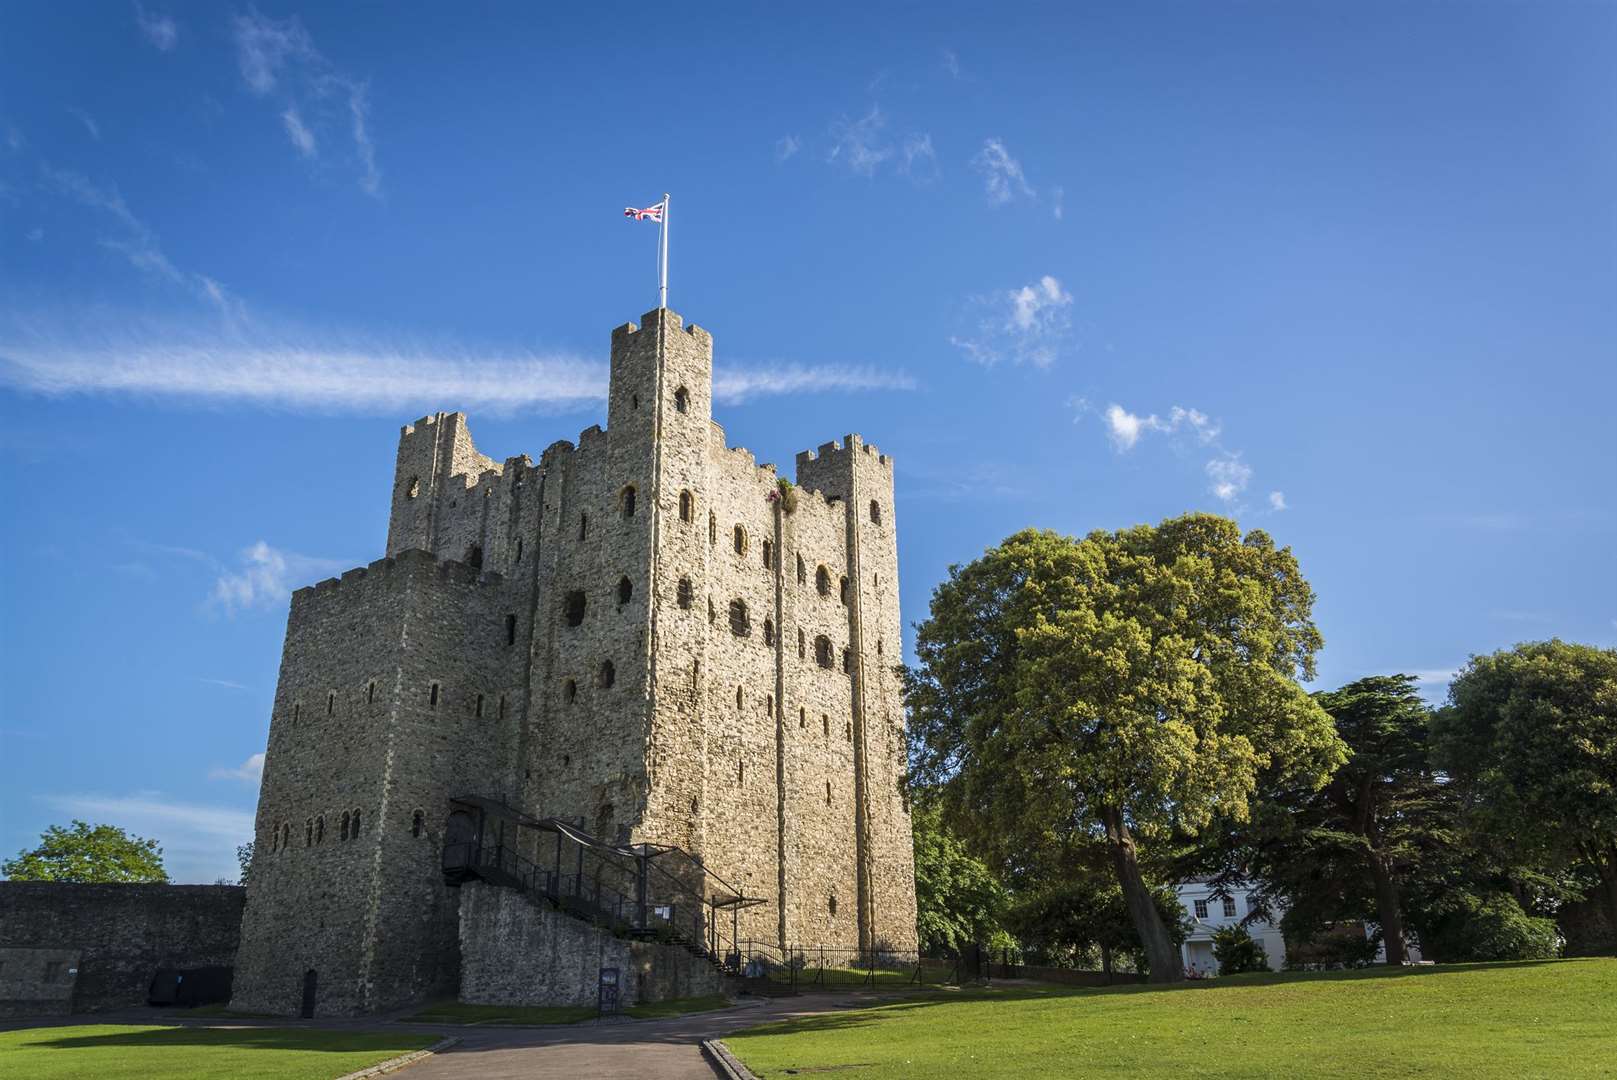 Rochester Castle is a focal point for the town